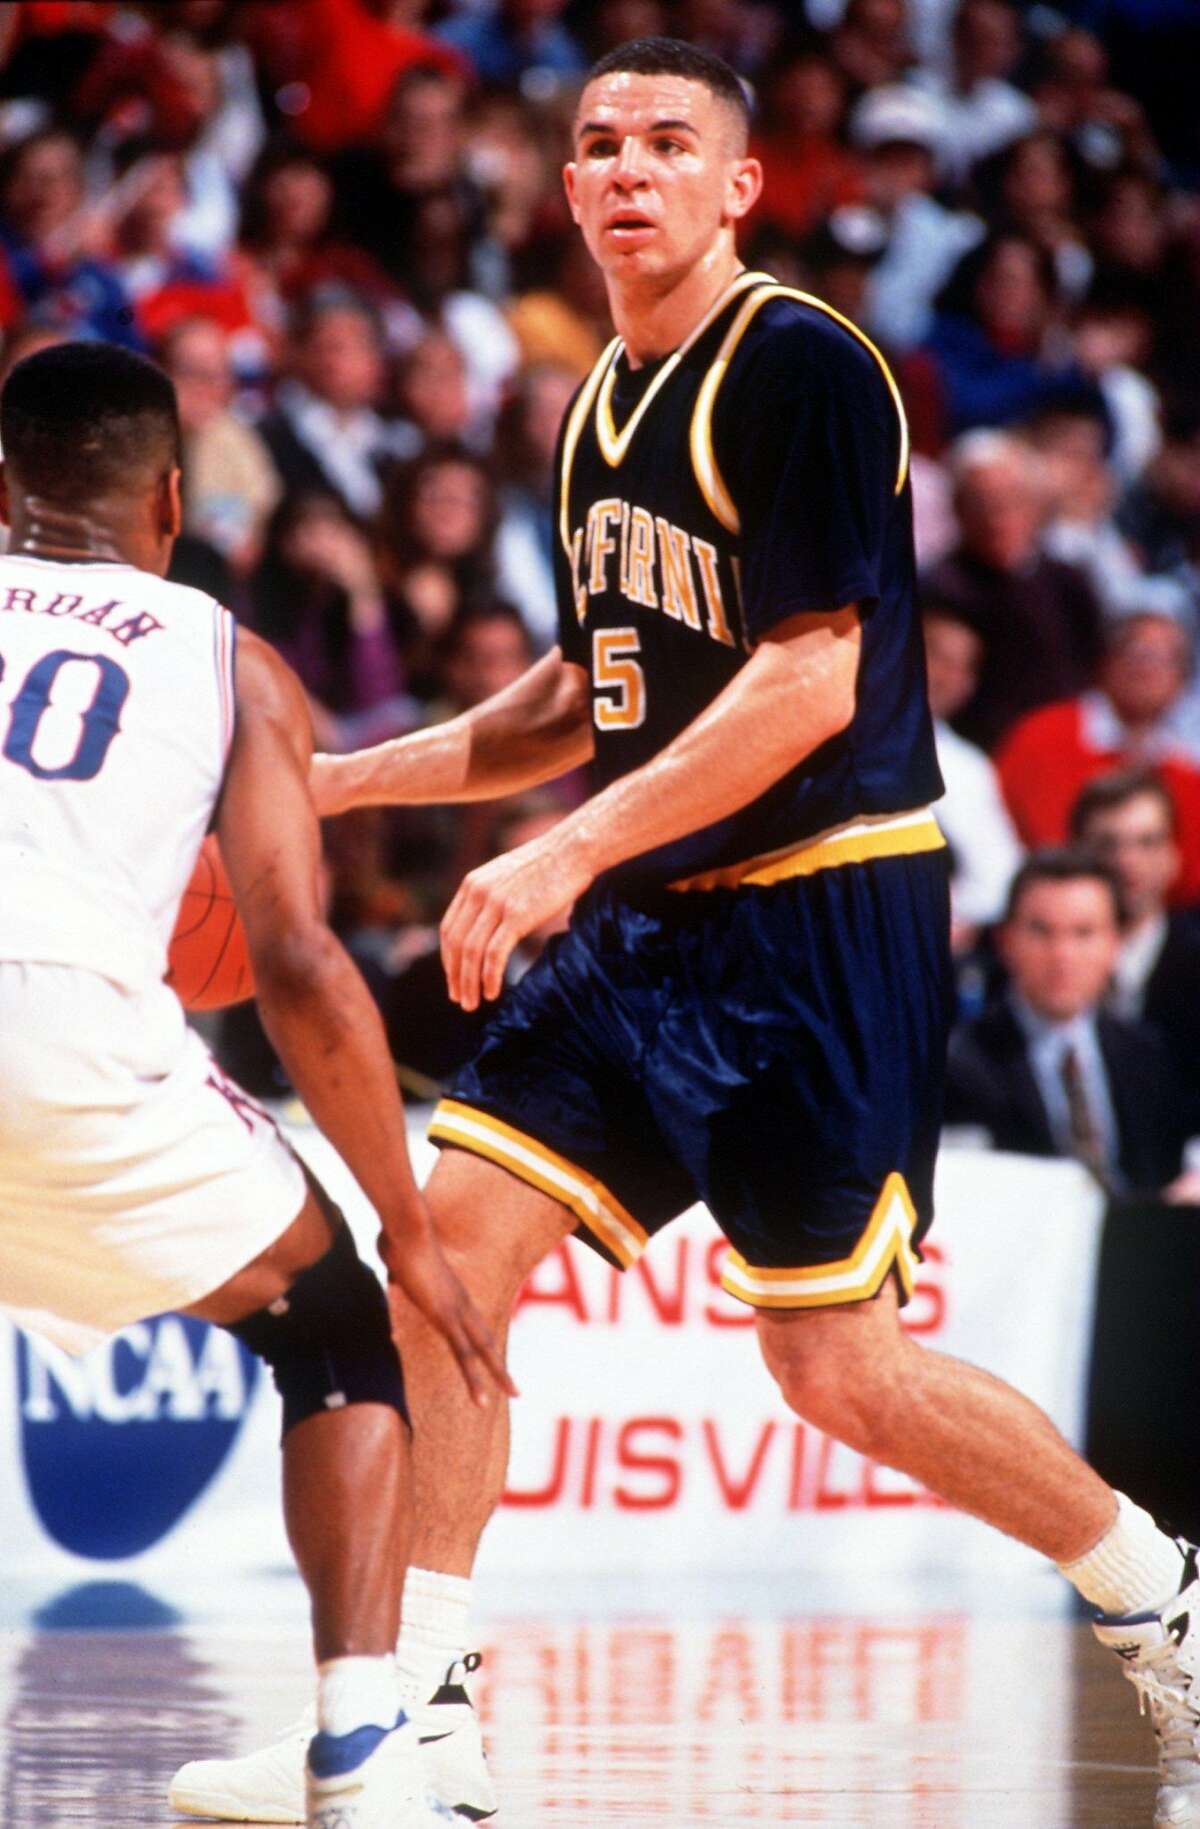 MAR 1993: CAL POINT GUARD JASON KIDD SCANS THE COURT DURING A THE GOLDEN BEARS GAME VERSUS THE KANSAS JAYHAWKS, IN THE 1993 NCAA TOURNAMENT. Mandatory Credit: Allsport/ALLSPORT